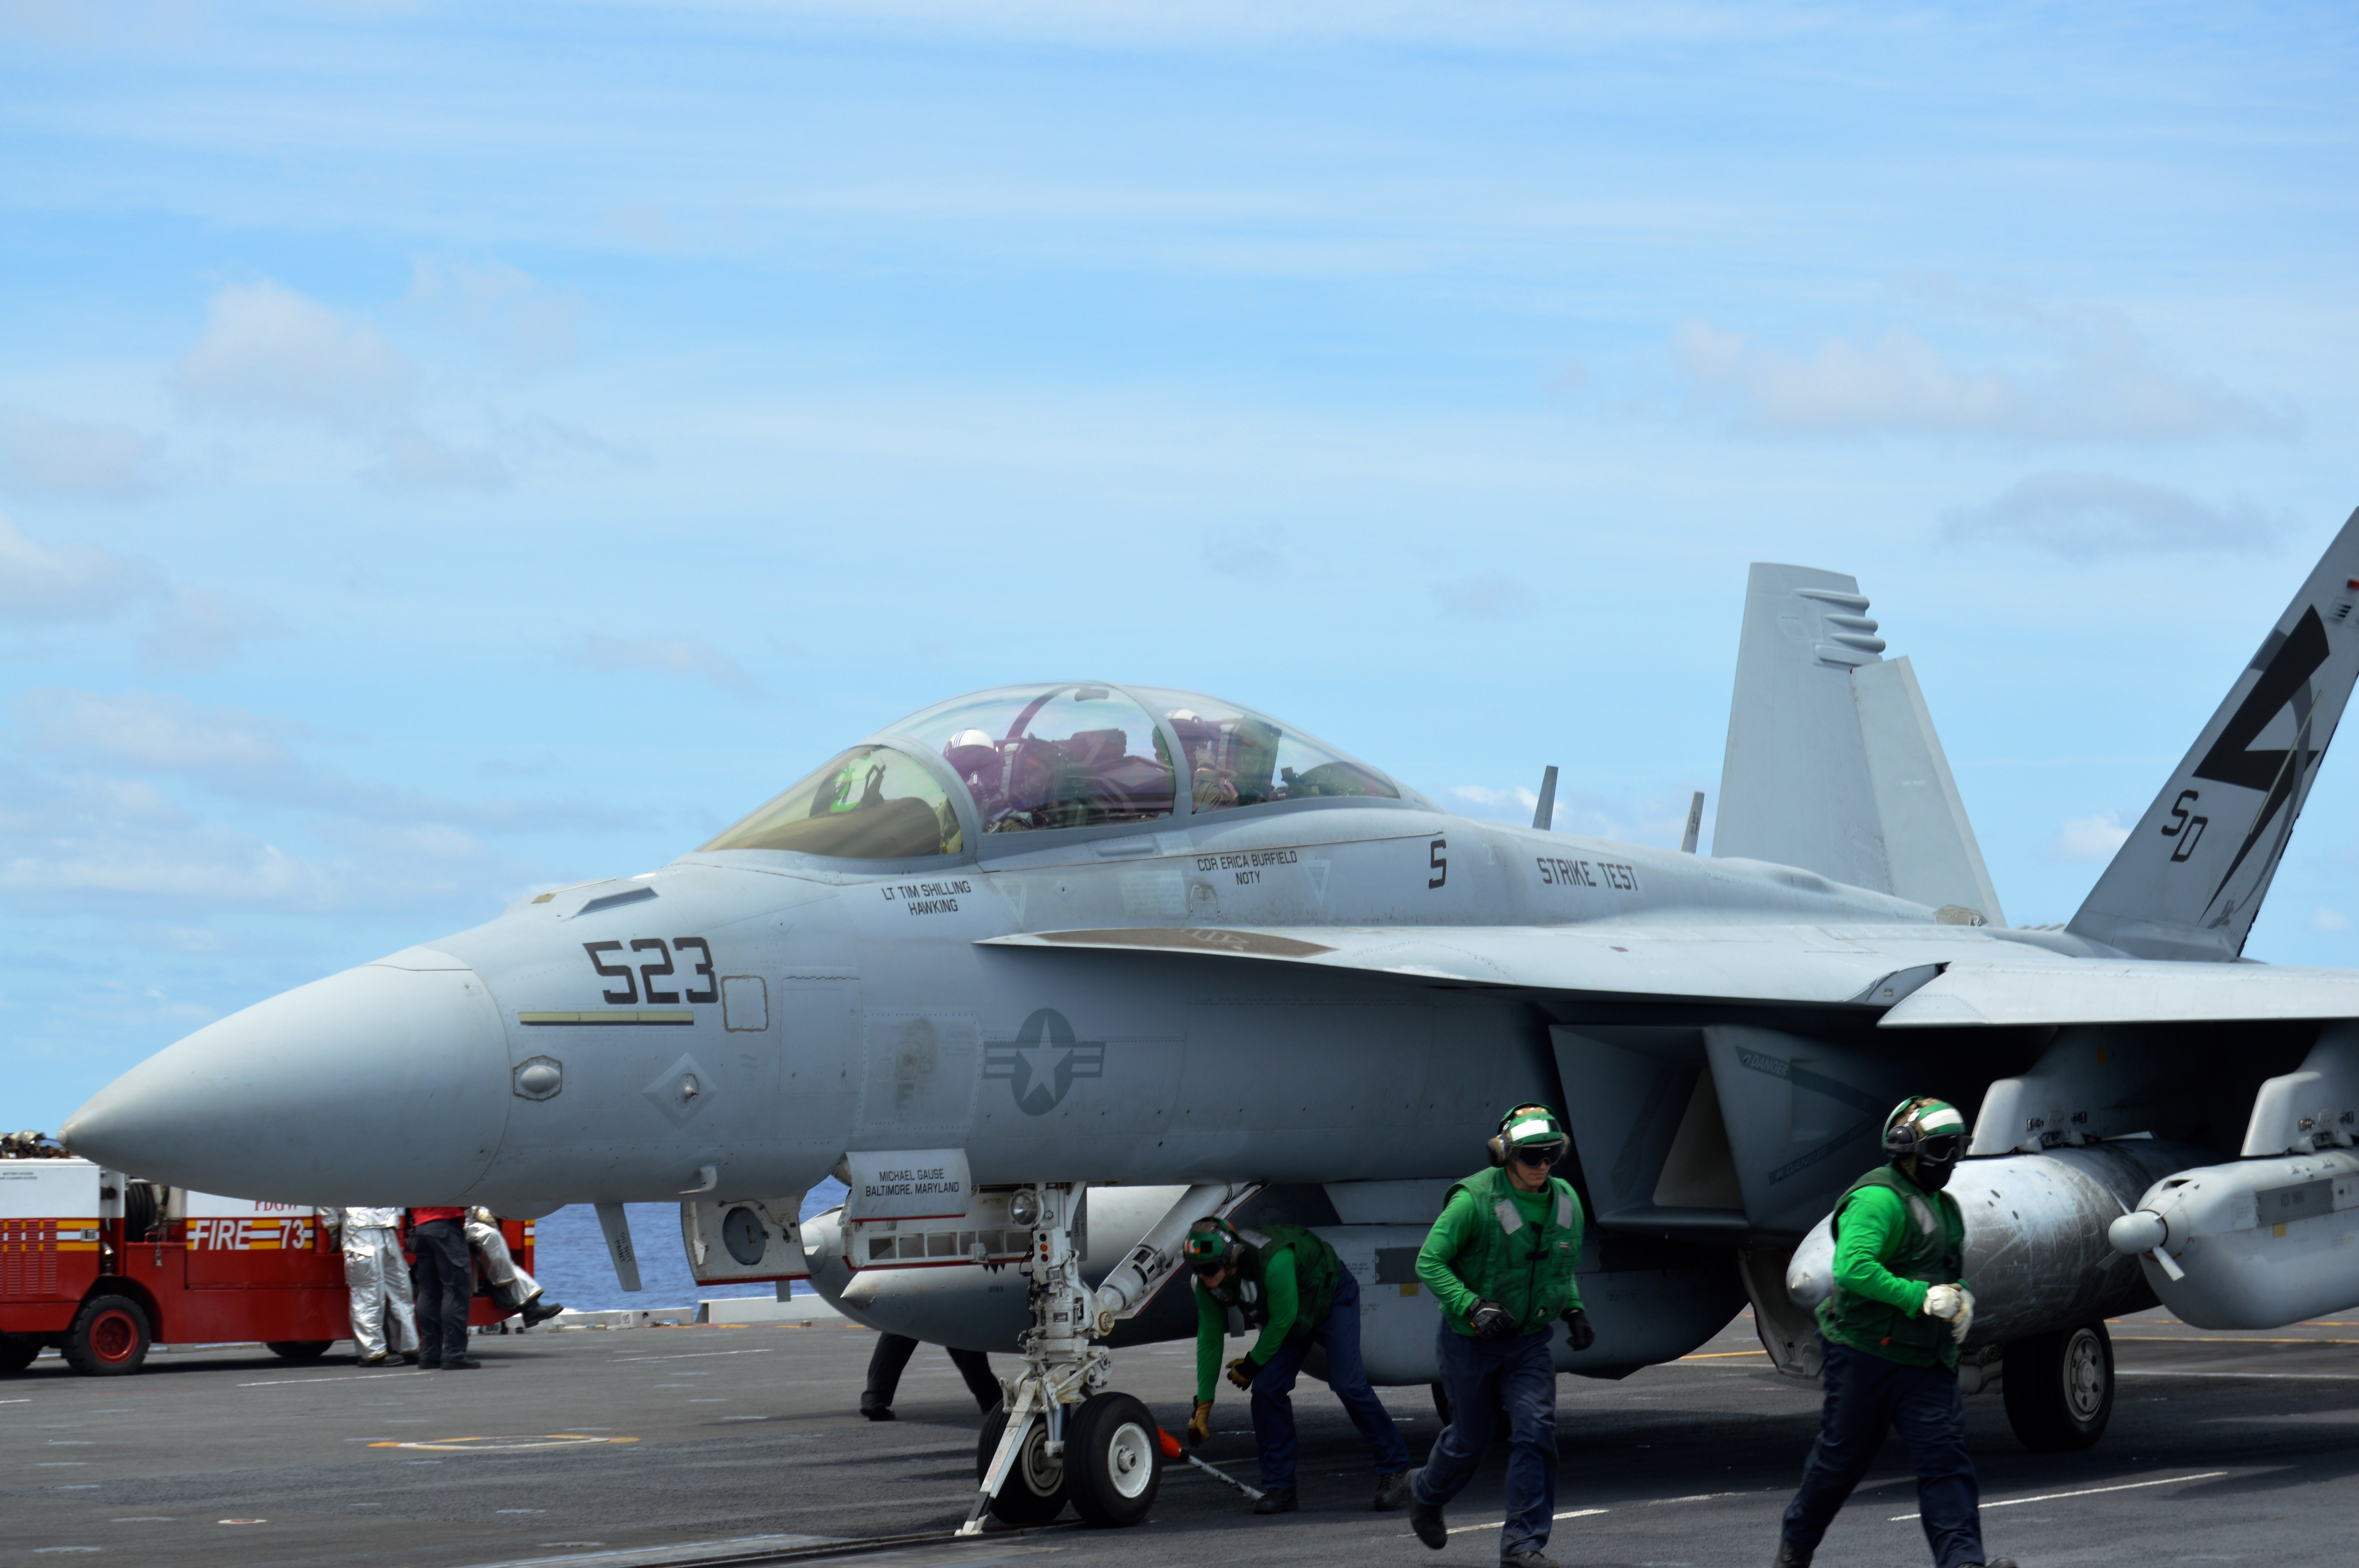 Test pilots from Air Test and Evaluation Squadron (VX) 23 prepare to launch off the deck of USS George Washington (CVN-73) on June 27, 2016, while testing the MAGIC CARPET carrier landing assistance technology. USNI News photo.